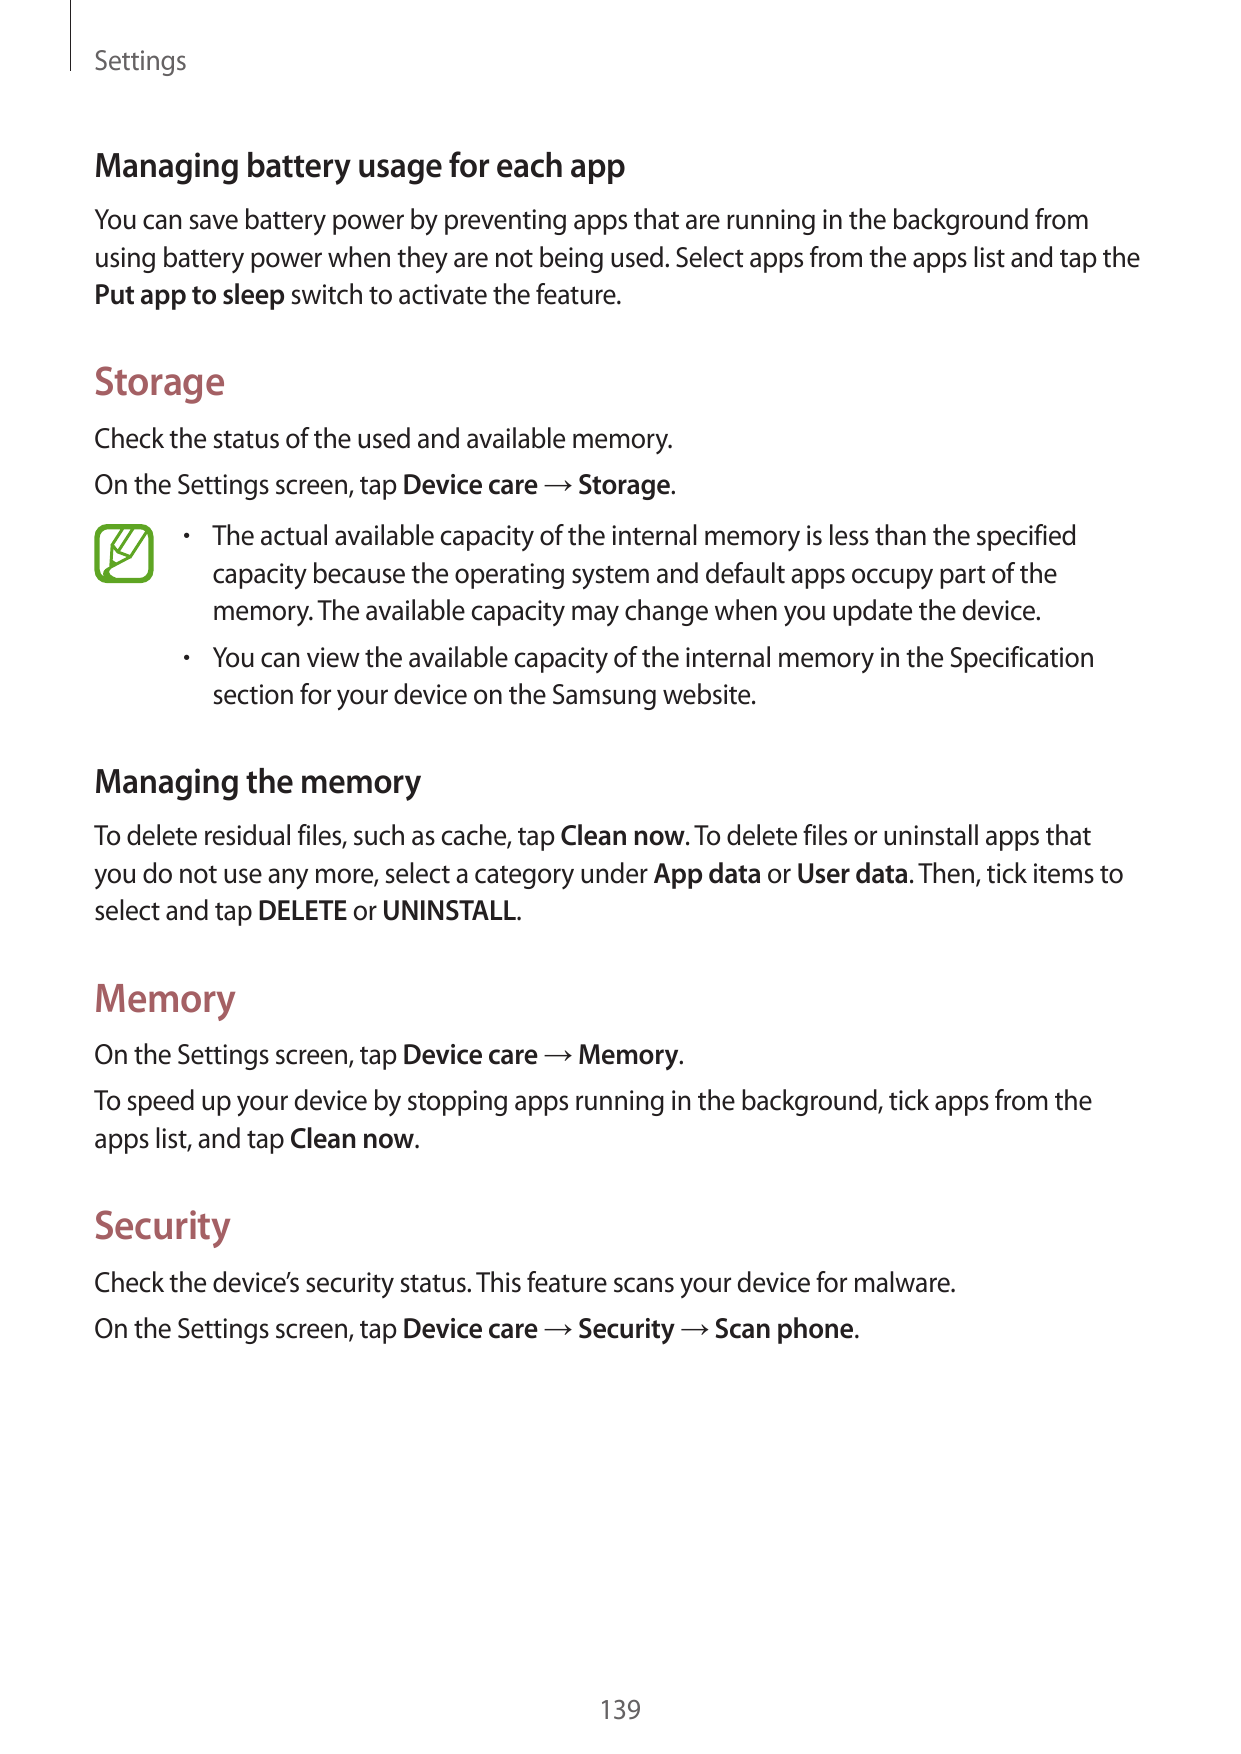 SettingsManaging battery usage for each appYou can save battery power by preventing apps that are running in the background from